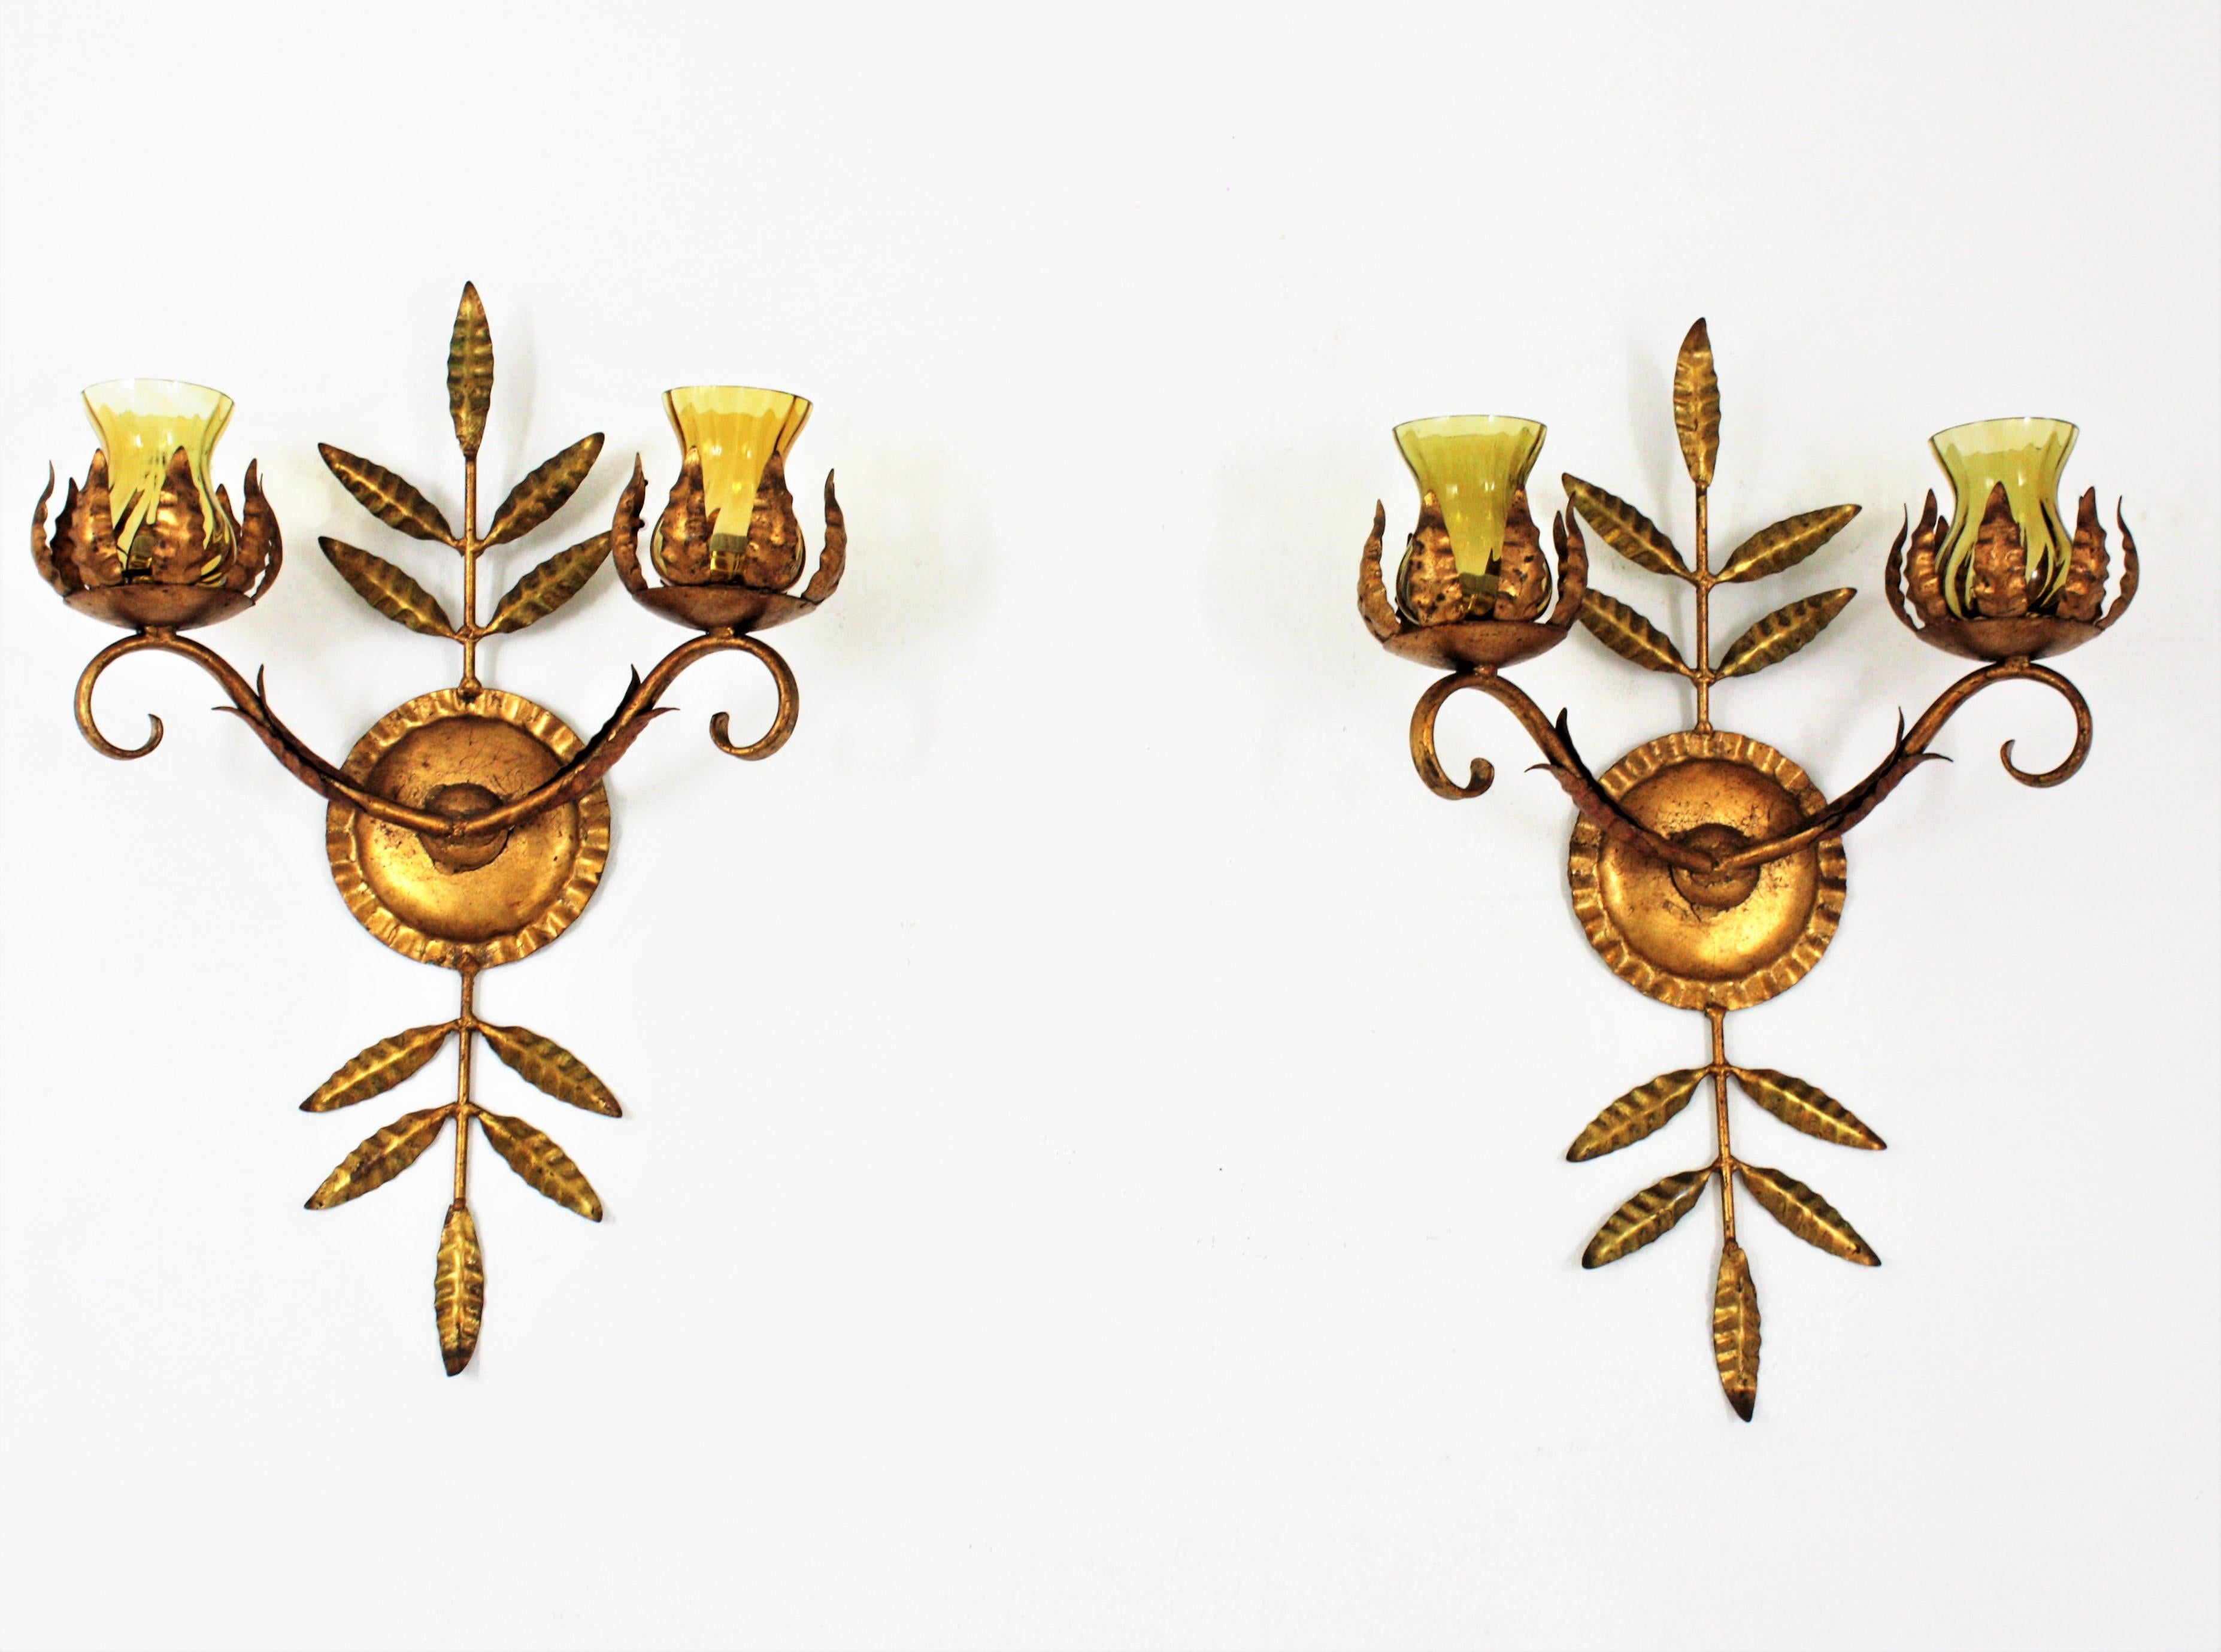 Elegant pair of two-arm gilt iron foliage wall lights with amber glass shades. Spain, 1940s
The backplate has a design of leaves holding two arms with one light each. Each arm has a leafed top and supports the bulb holder with an amber glass